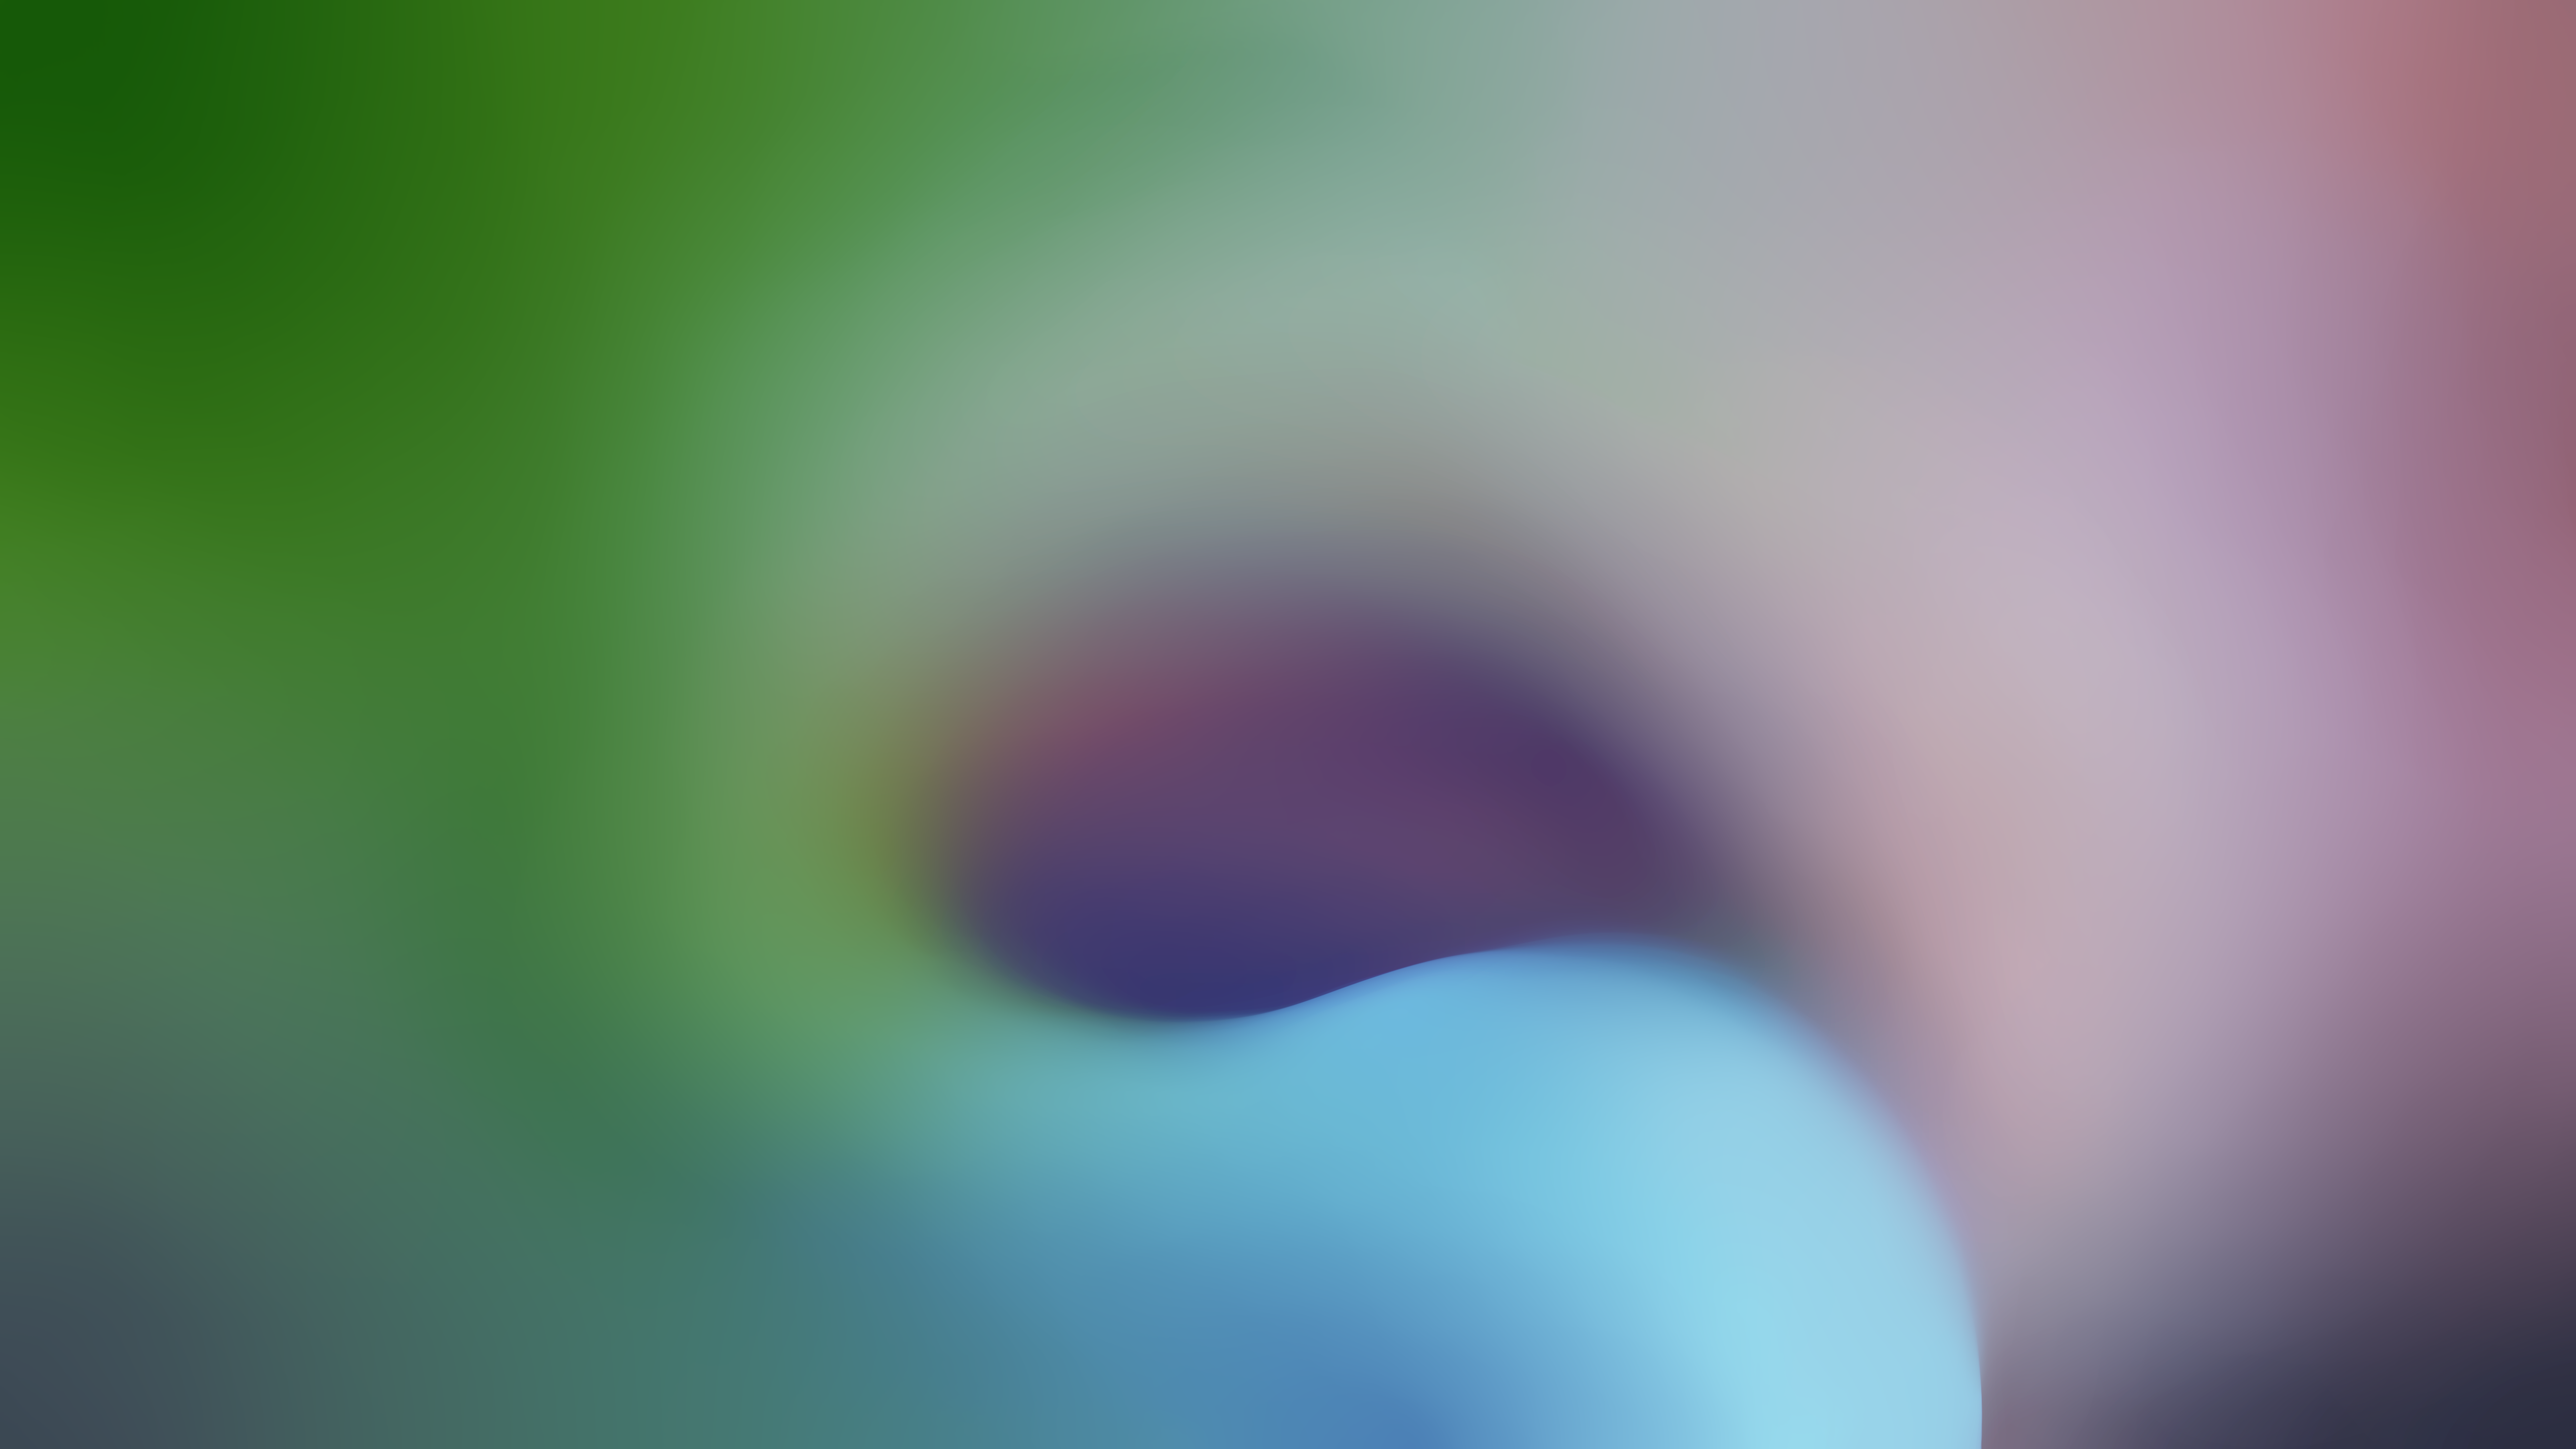 Wallpaper Colorful, Blur background, Minimal, HD, 5K, Abstract,. Wallpaper for iPhone, Android, Mobile and Desktop